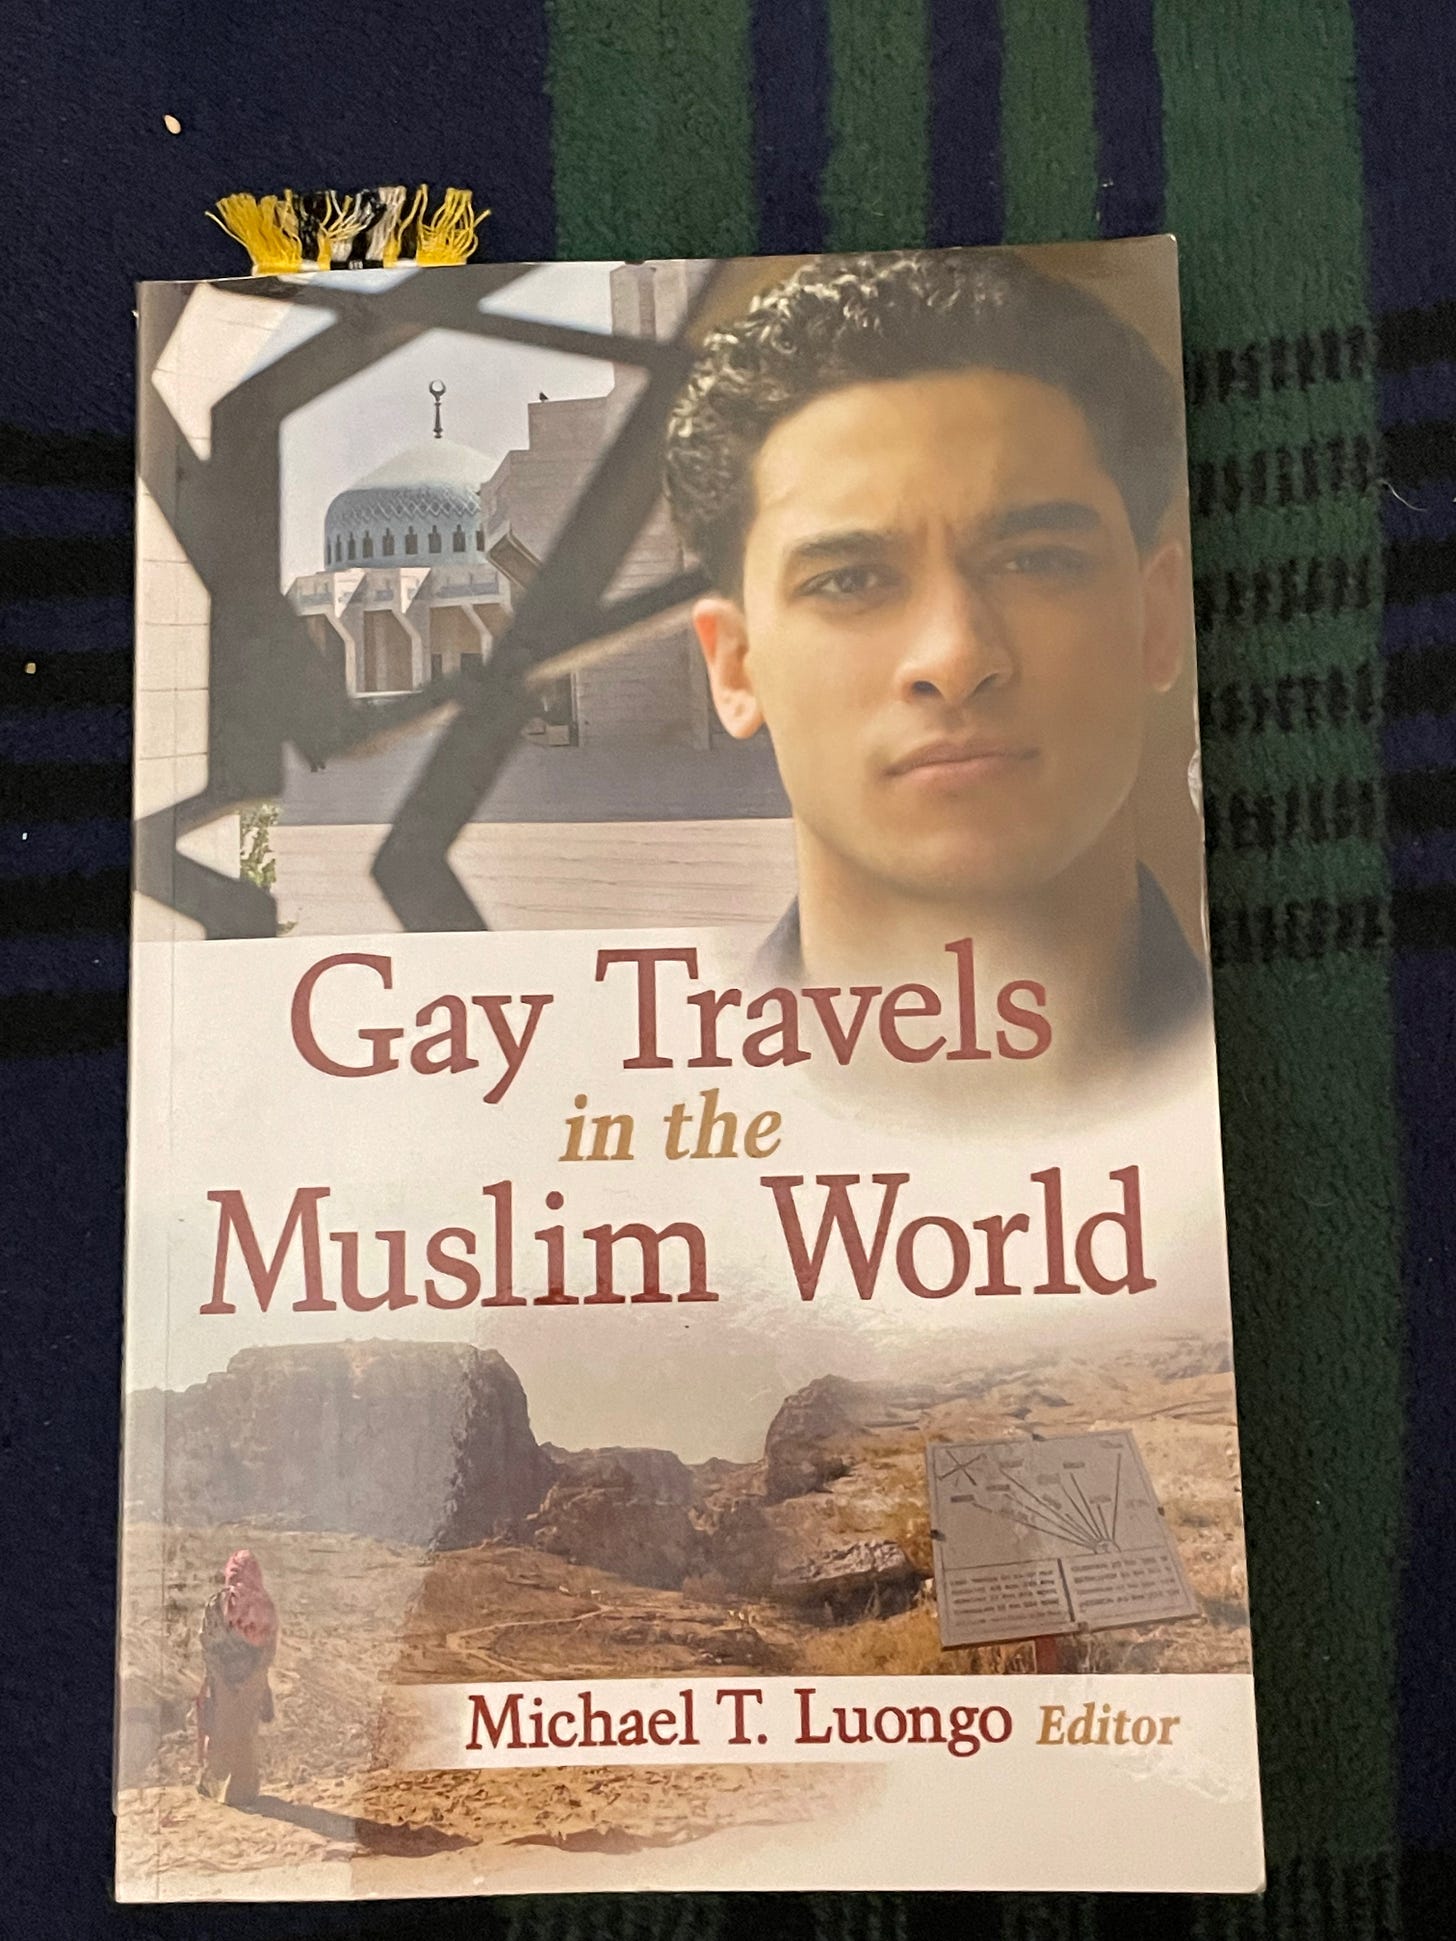 Photo of the cover of the book Gay Travels in the Muslim World, Michael T. Luongo, editor